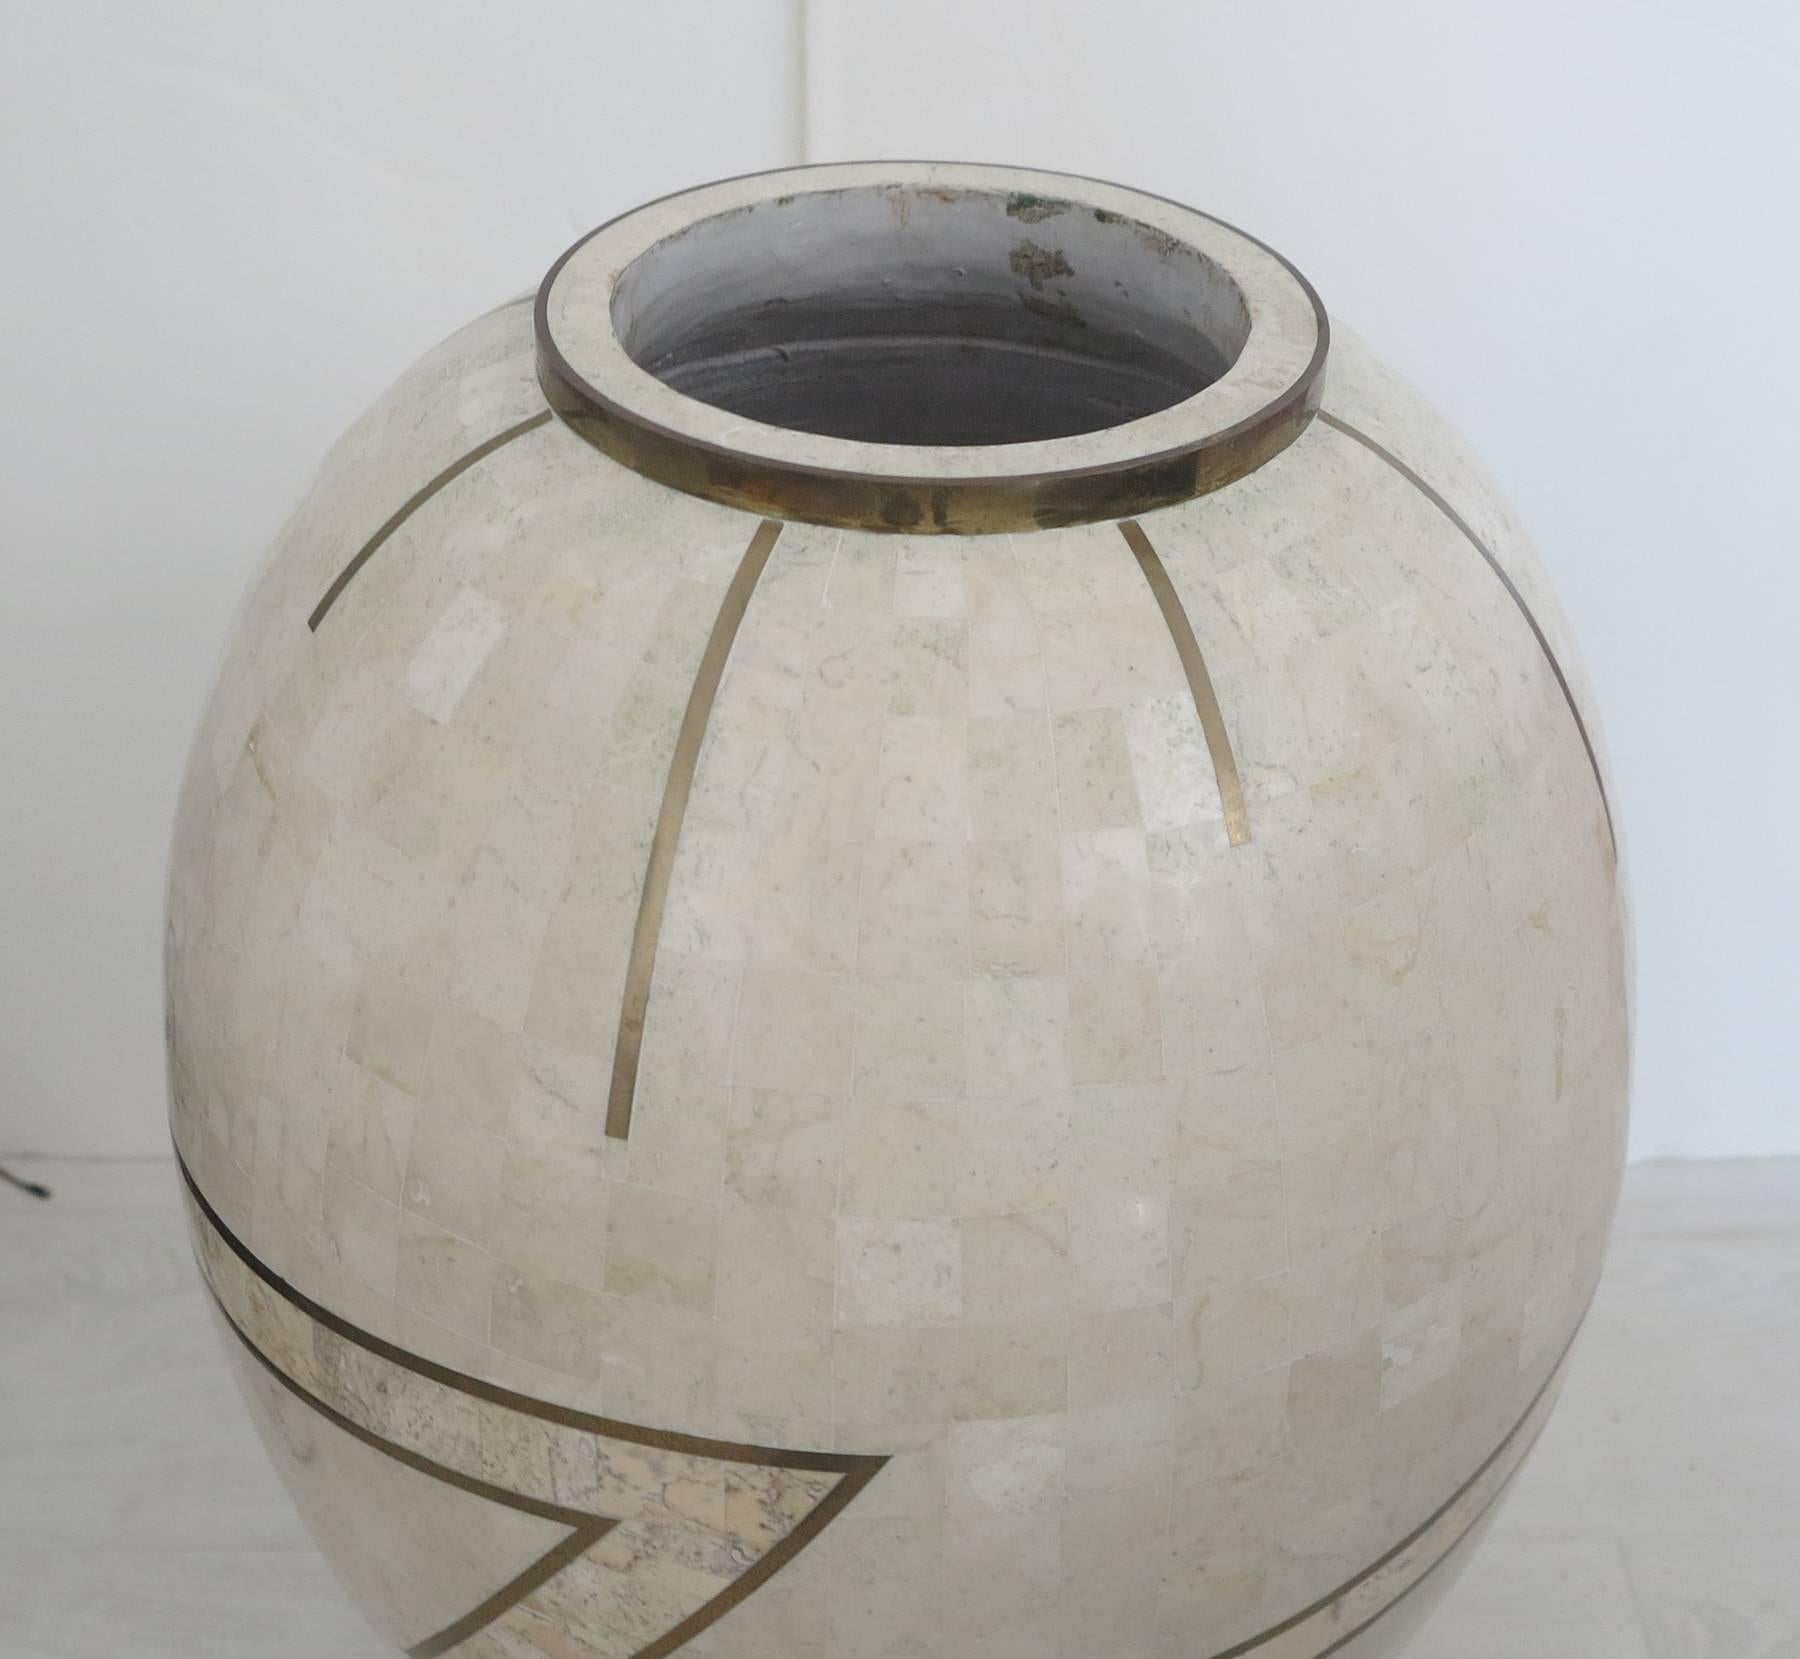 Large floor vase in the style of Maitland-Smith. Tessellated with rectangles of marble with inlay brass decoration. A large and heavy floor vase in very good condition. No chips or cracks to the marble.